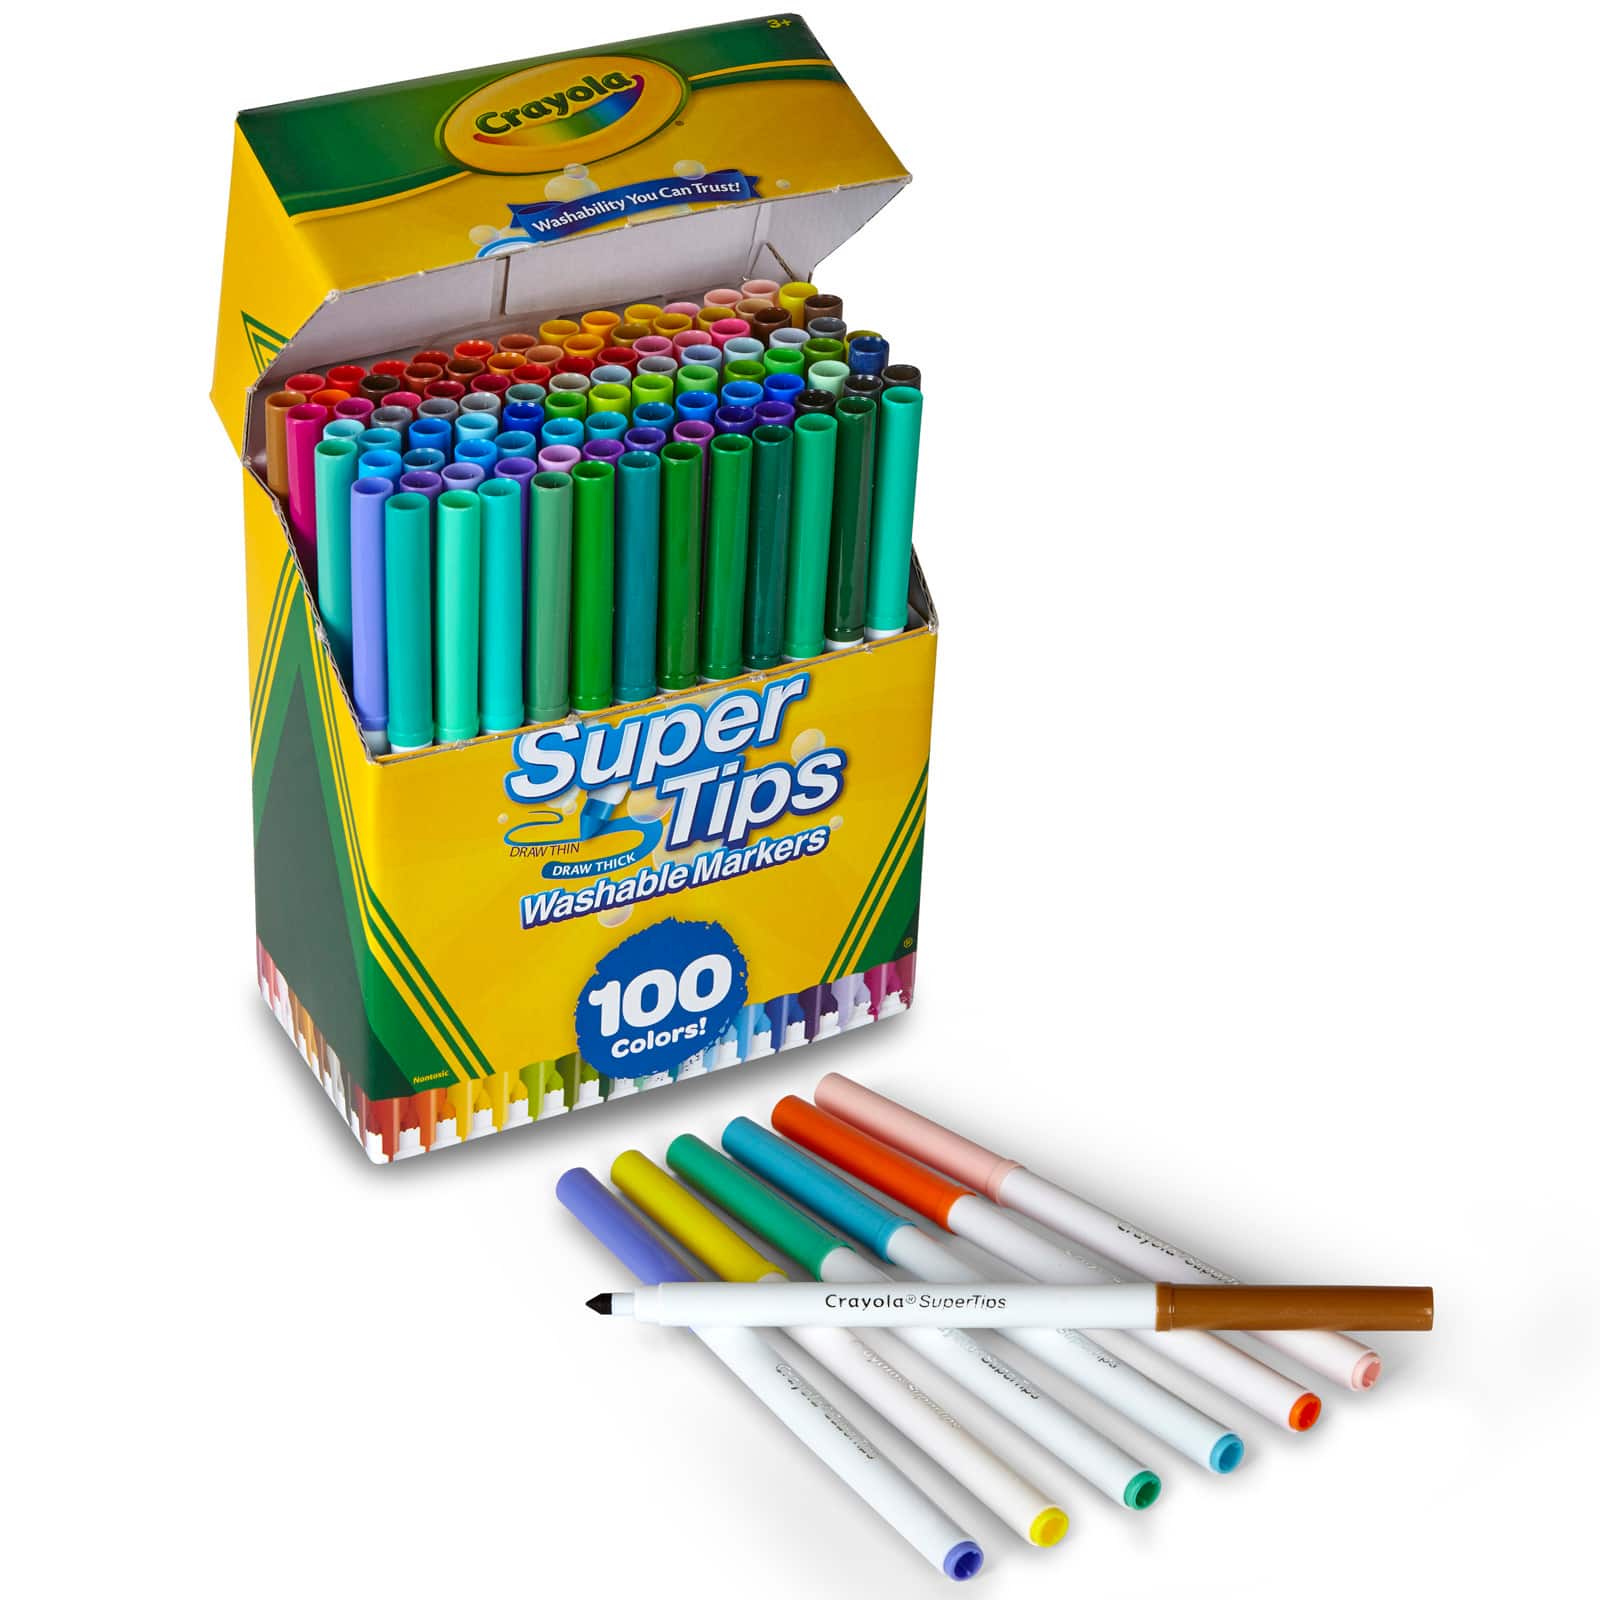 Kay Creates - 63/100 swatches of Crayola Supertips (bought